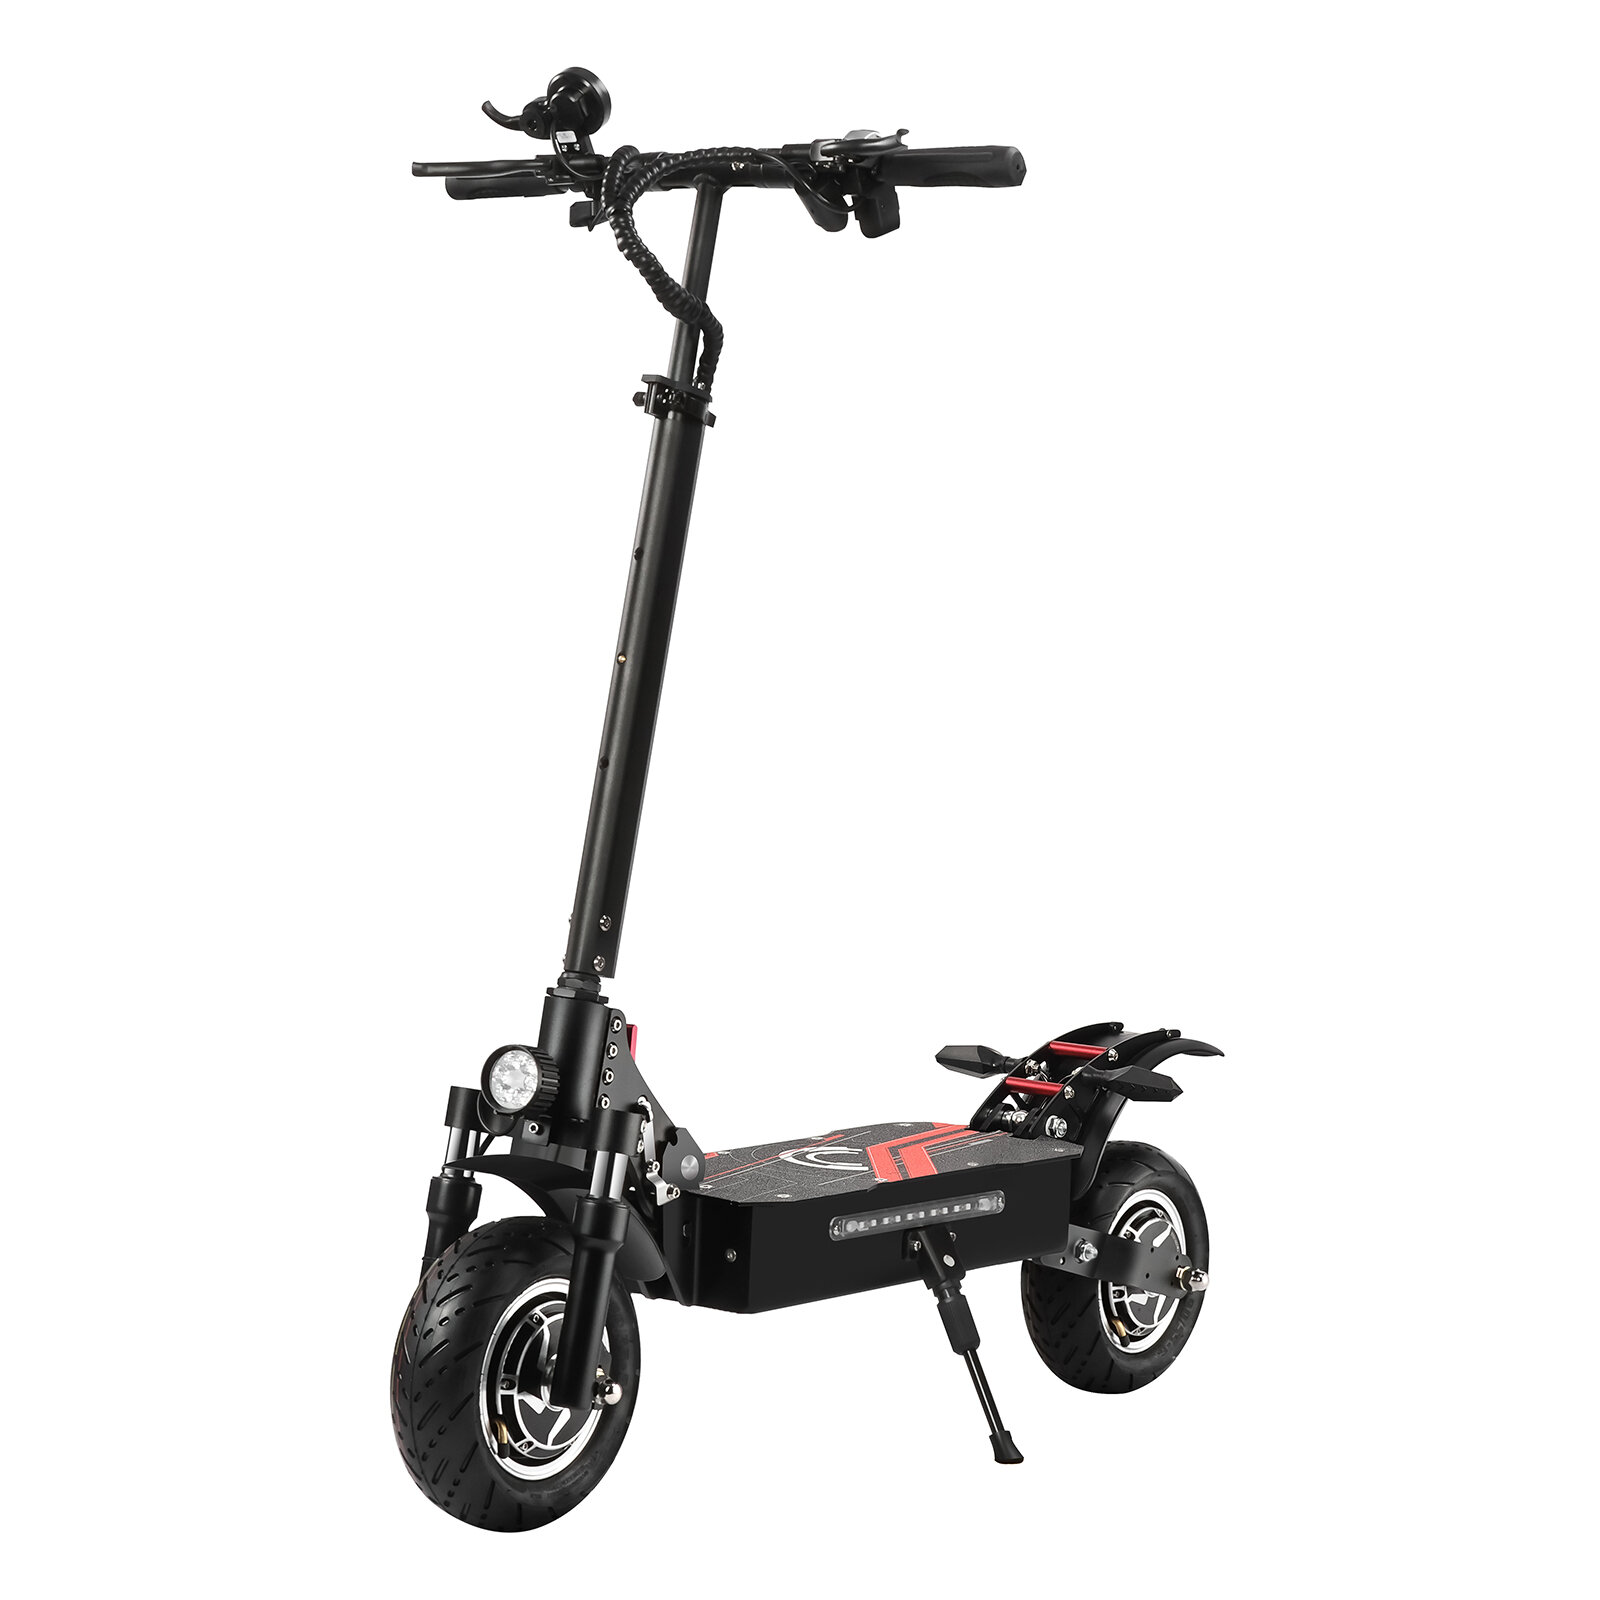 best price,boyueda,q7pro,52v,19ah,1600wx2,inch,electric,scooter,eu,discount